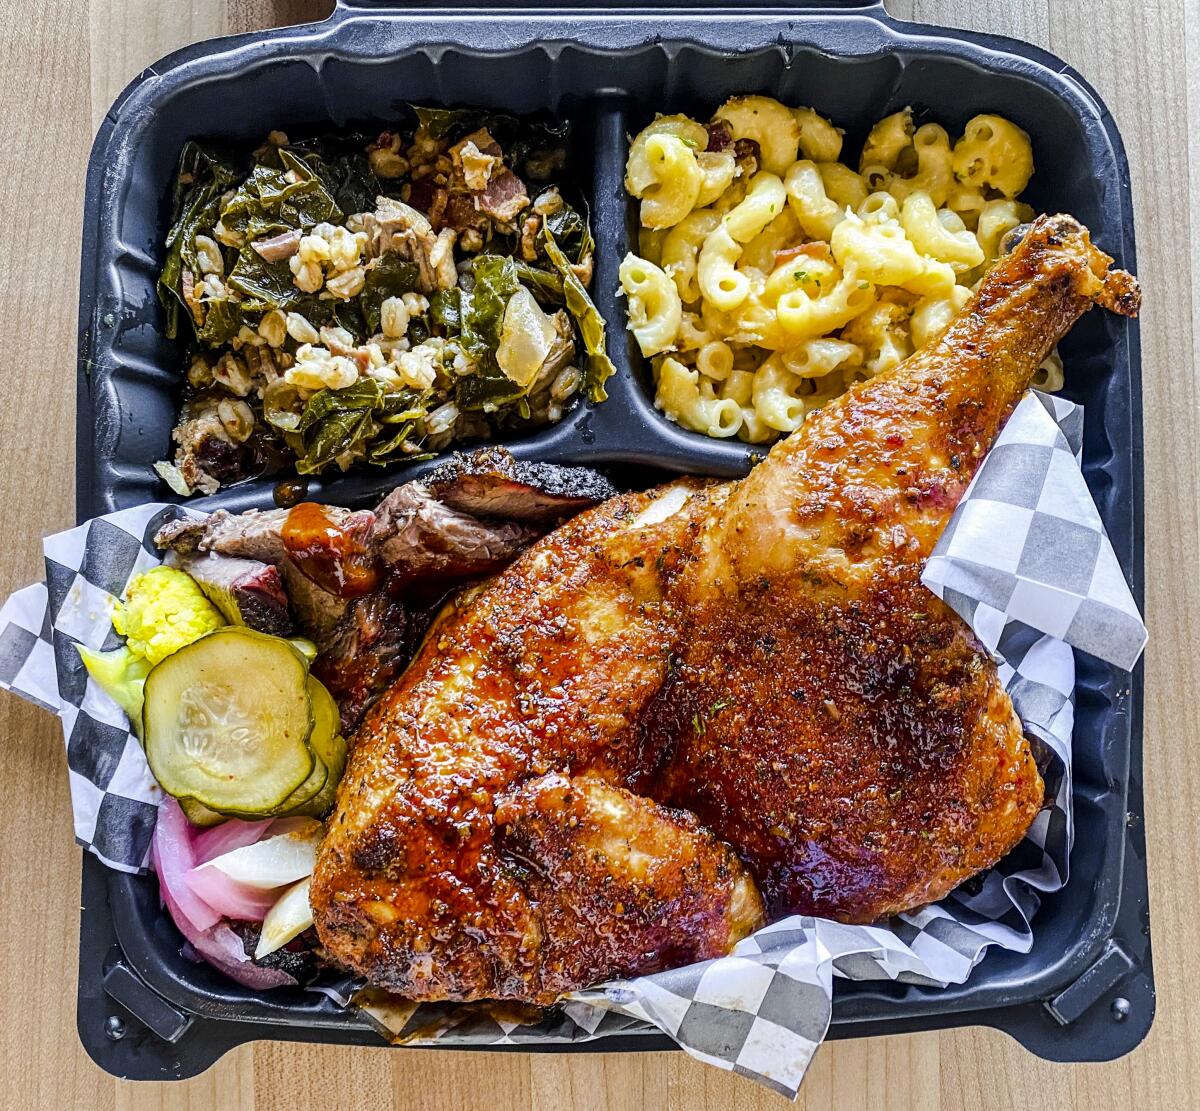 A takeout container with barbecued chicken, collard greens and macaroni and cheese.